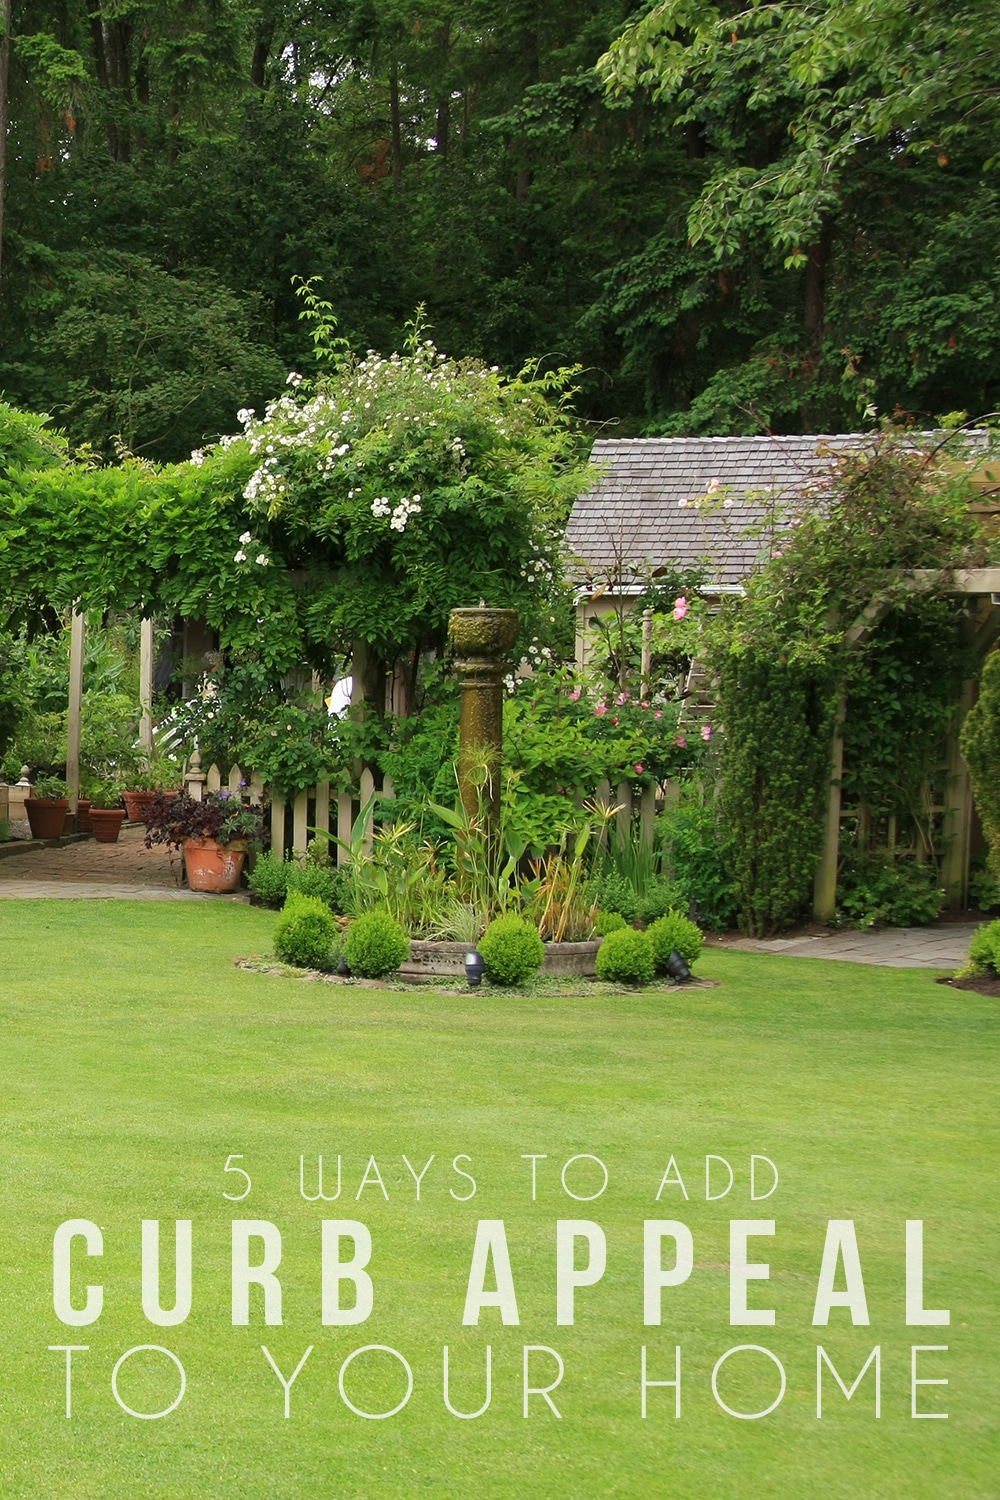 5 Ways to Add Curb Appeal To Your Home